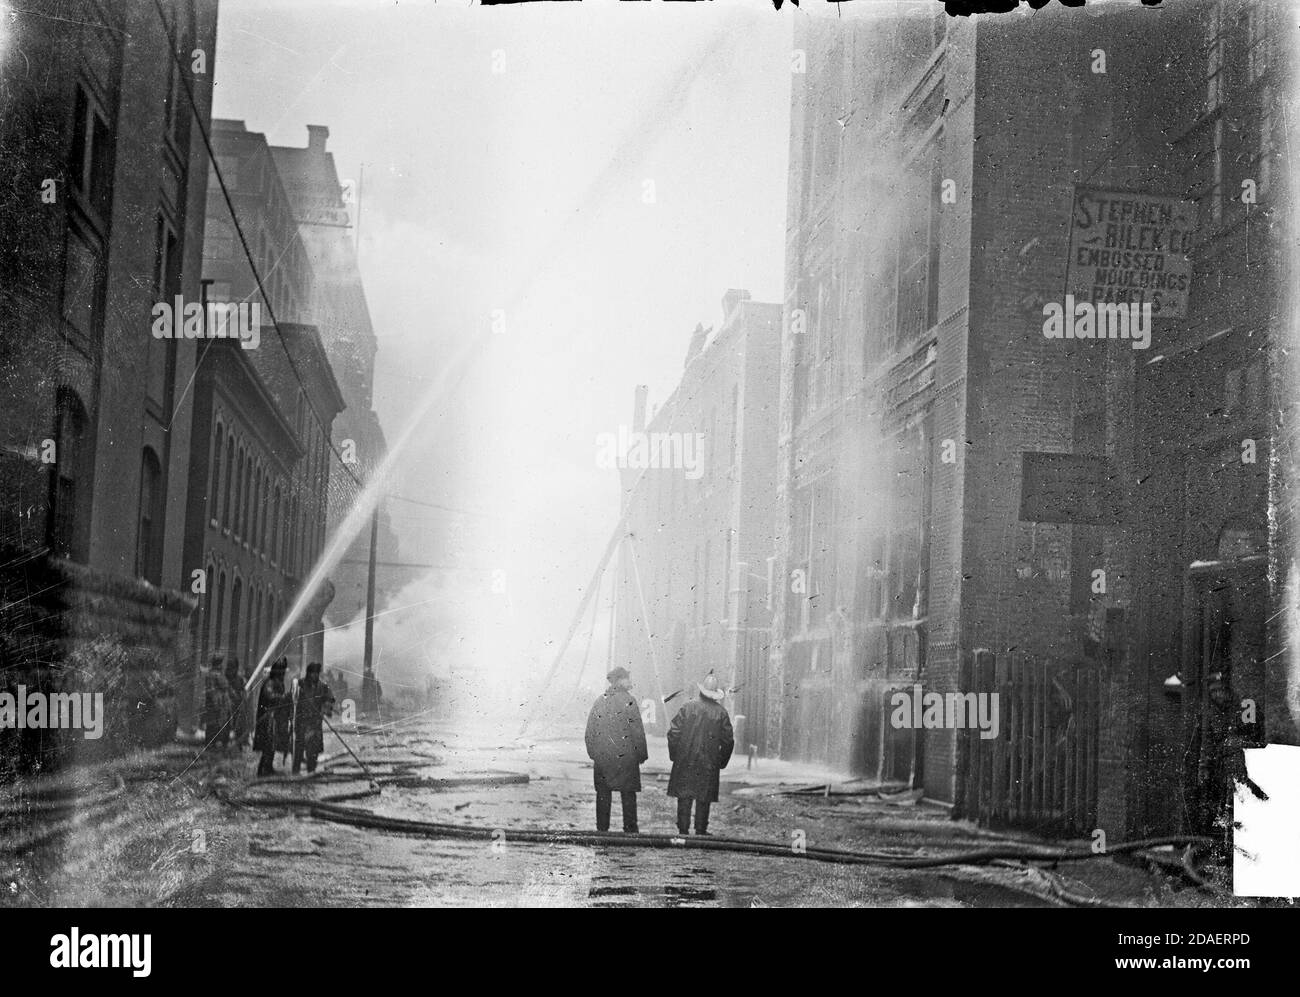 Firefighters spraying water at the Iroquois Theater building during the fire, Chicago, Illinois, December 30, 1903. Stock Photo